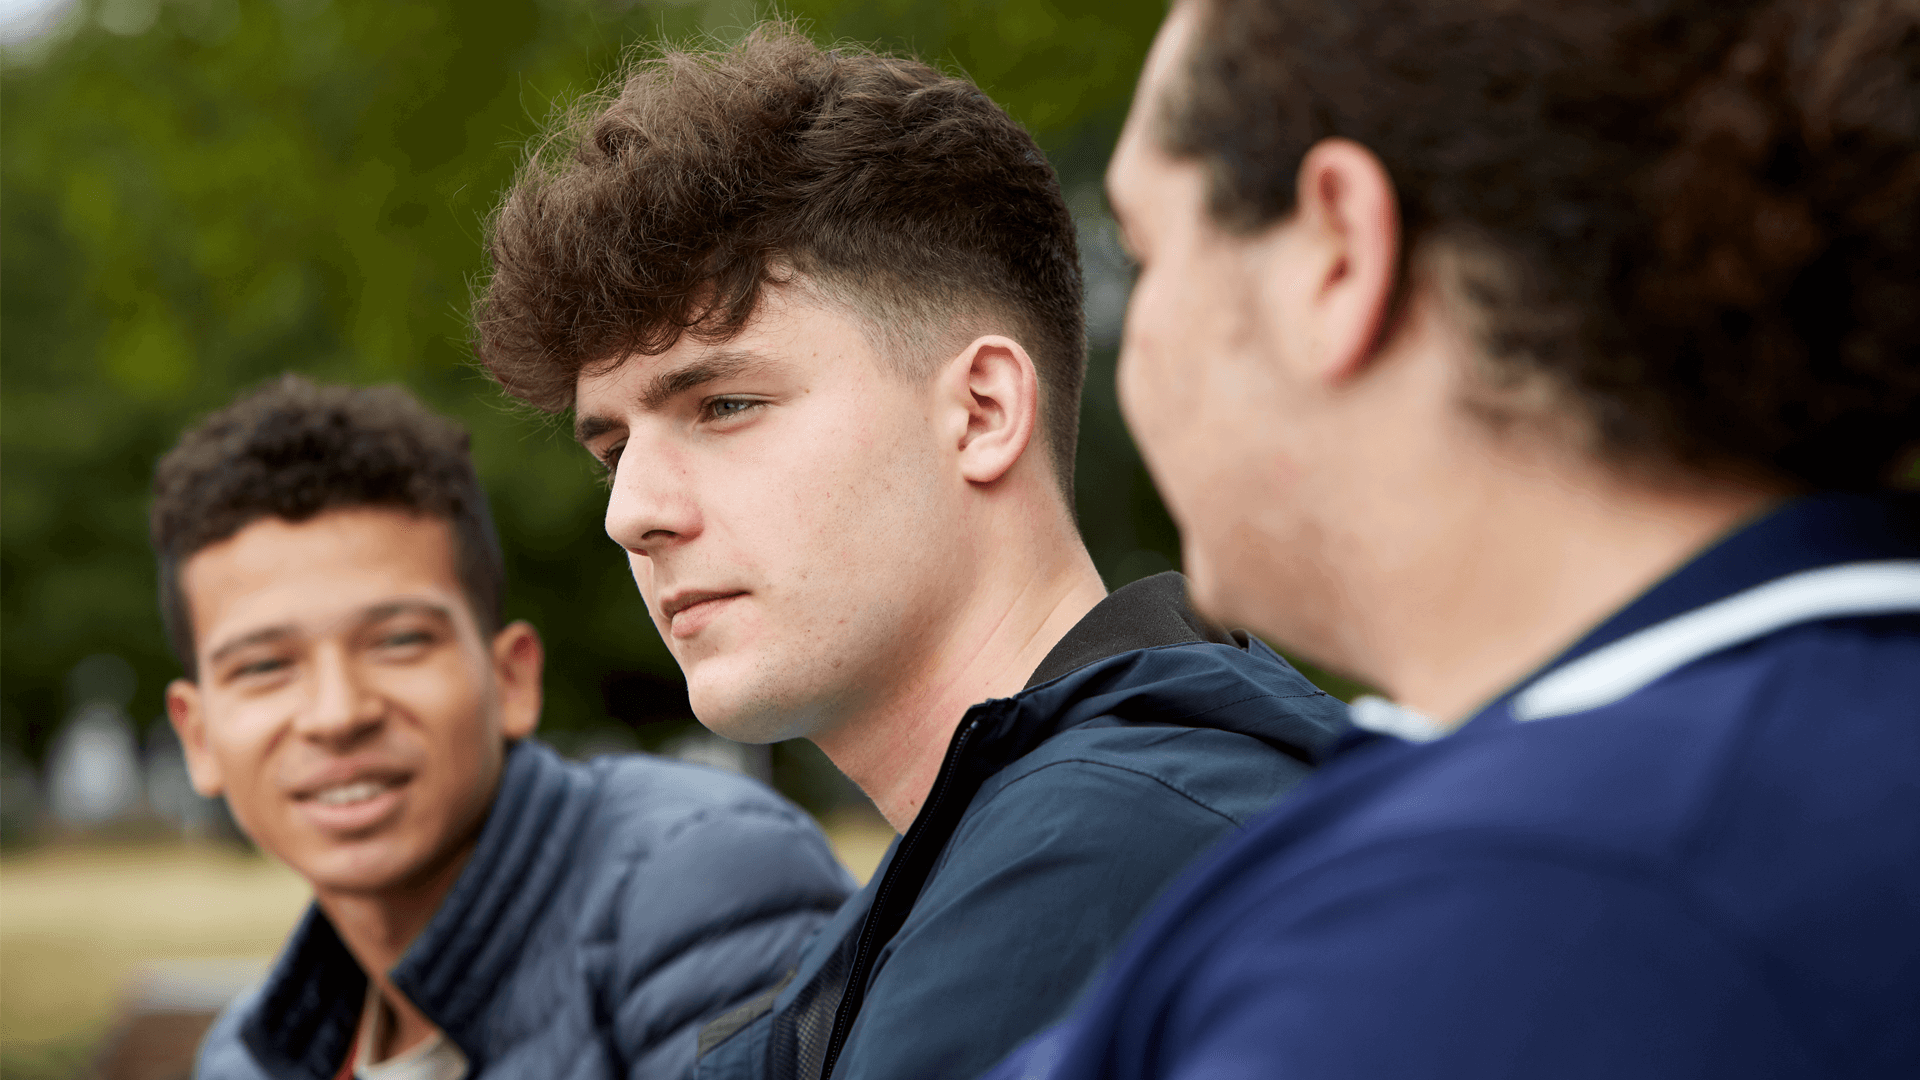 close-up-of-three-young-people-two-boys-both-in-blue-jacket-and-has-culry-hair-looking-at-the-boy-in-between-them-who-is-looking-away-and-seems-to-be-in-deep-thoughts